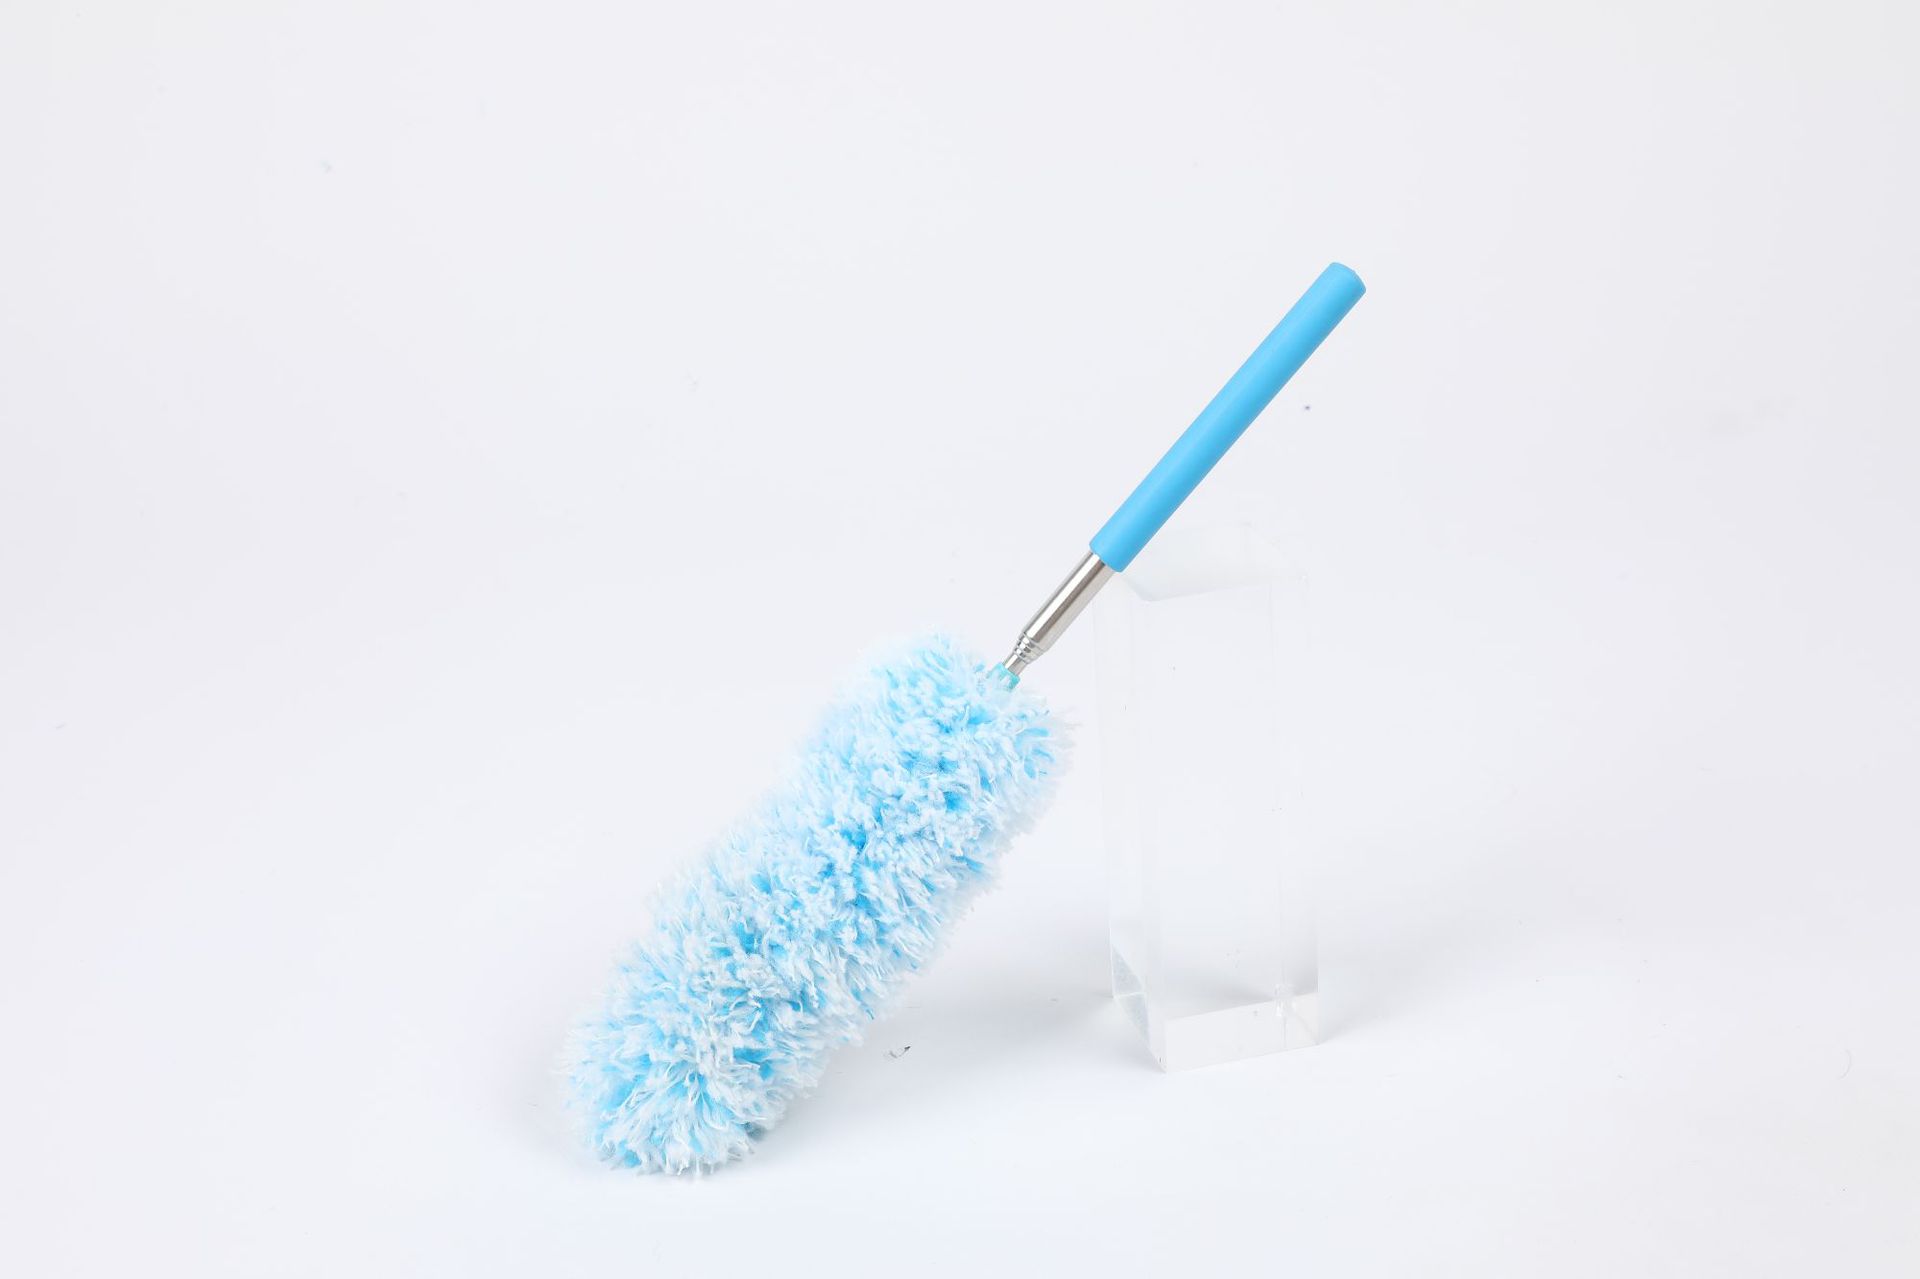 Household Feather Duster Retractable Flexible Washable Lint-Free Electrostatic Sweep Ash Dust Removal Dust-Free Feather Duster